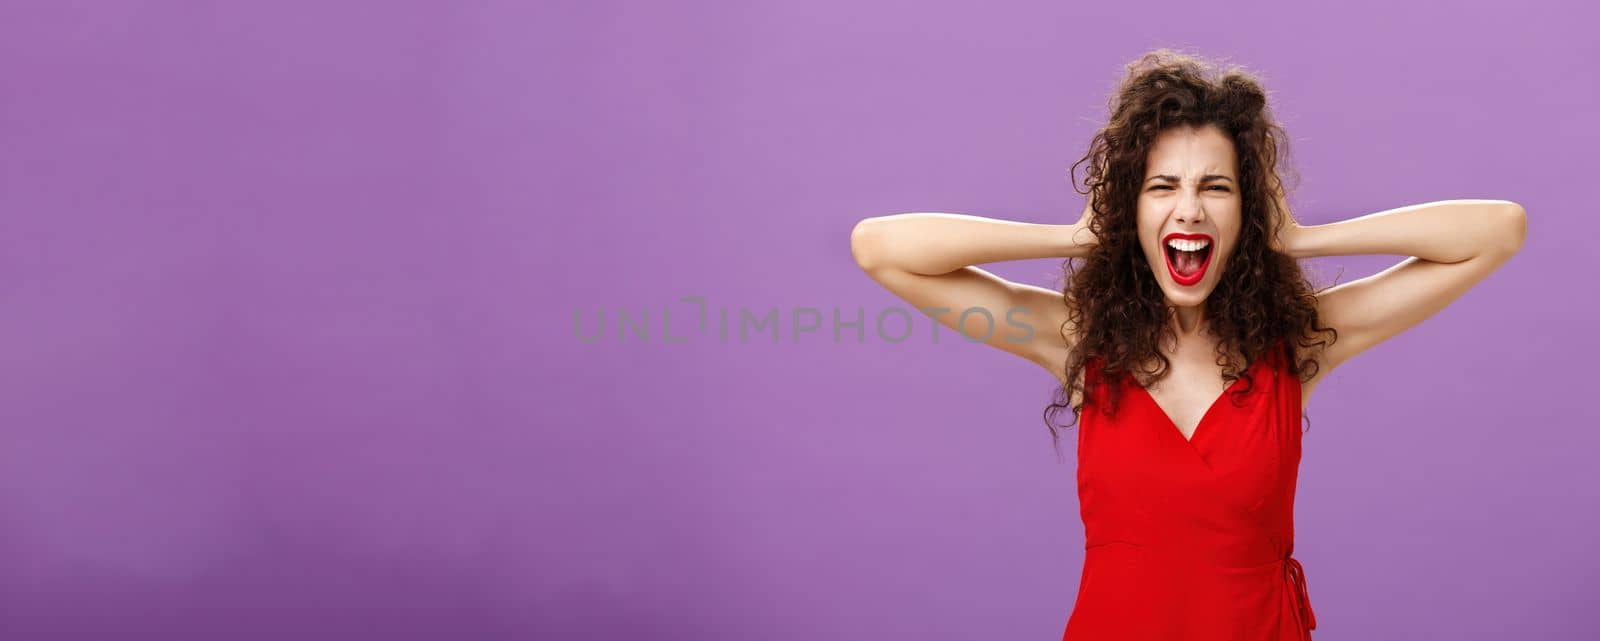 Ex-boyfriend spoilt woman formal event being outraged. and pissed yelling in fury holding hands on curly hair grimacing from anger standing over purple background in stylish evening red dress.